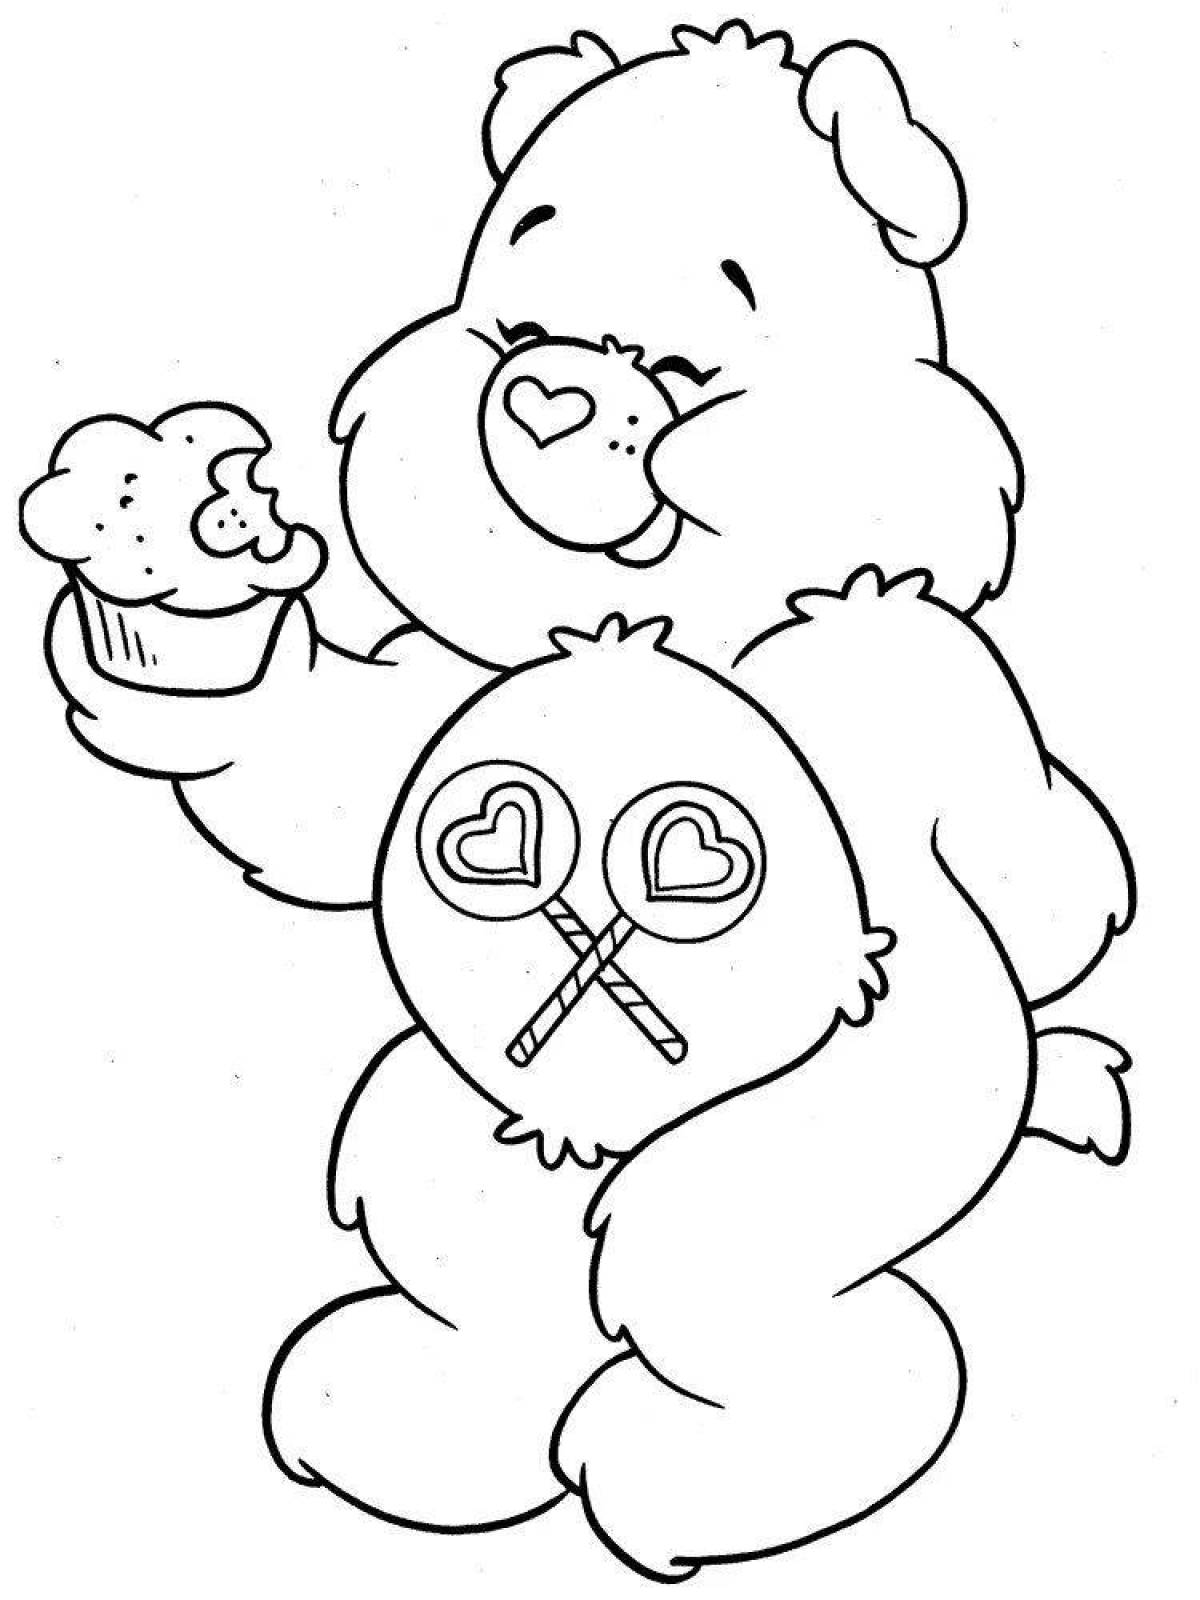 Playtime care bears coloring book